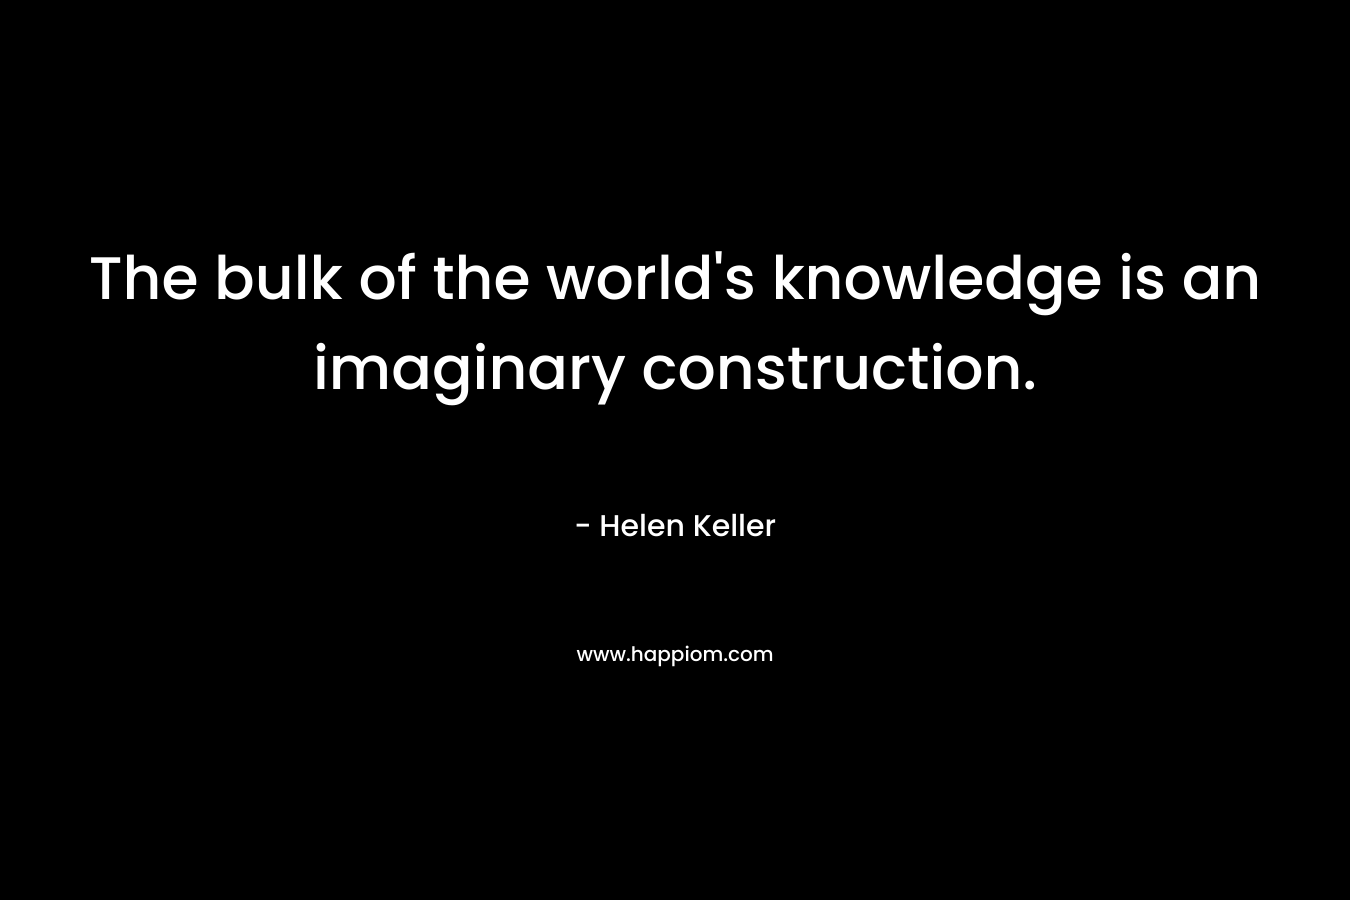 The bulk of the world’s knowledge is an imaginary construction. – Helen Keller